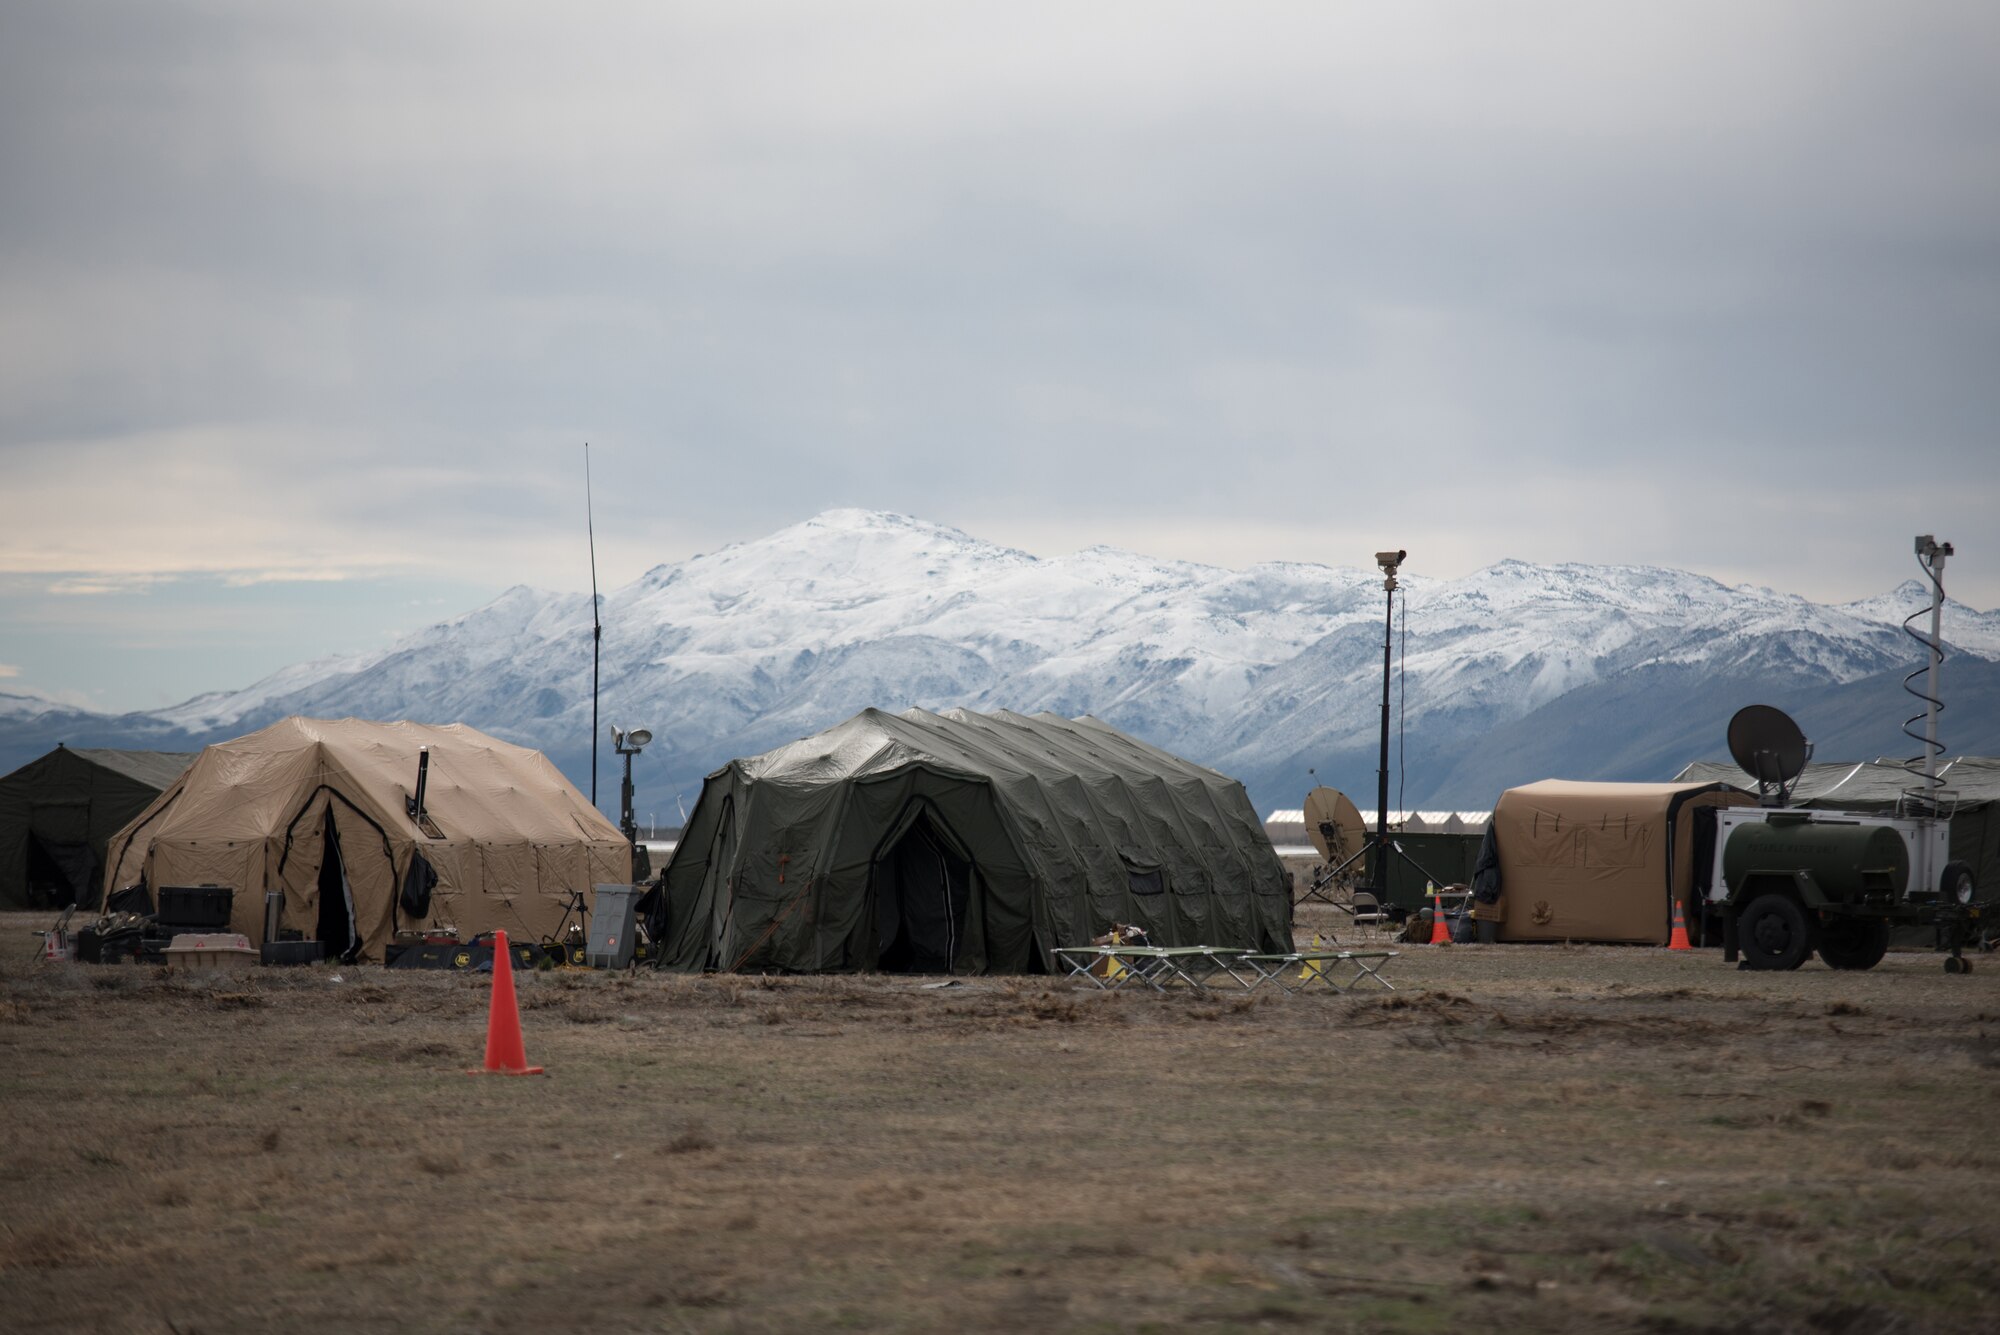 Operations tents set up by the Kentucky Air National Guard’s 123rd Contingency Response Group sit along the Sierra Nevada Mountains at Amedee Army Airfield, Calif., on March 8, 2016. The 123rd CRG is working in conjunction with the U.S. Army’s 688th Rapid Port Opening Element and a team from the Defense Logistics Agency to operate Joint Task Force-Port Opening Sangala during a week-long exercise called Operation Lumberjack. The objective of the JTF-PO is to establish an aerial port of debarkation, provide initial distribution capability and set up warehousing capability for distribution beyond a forward node. (Kentucky Air National Guard photo by Master Sgt. Phil Speck)